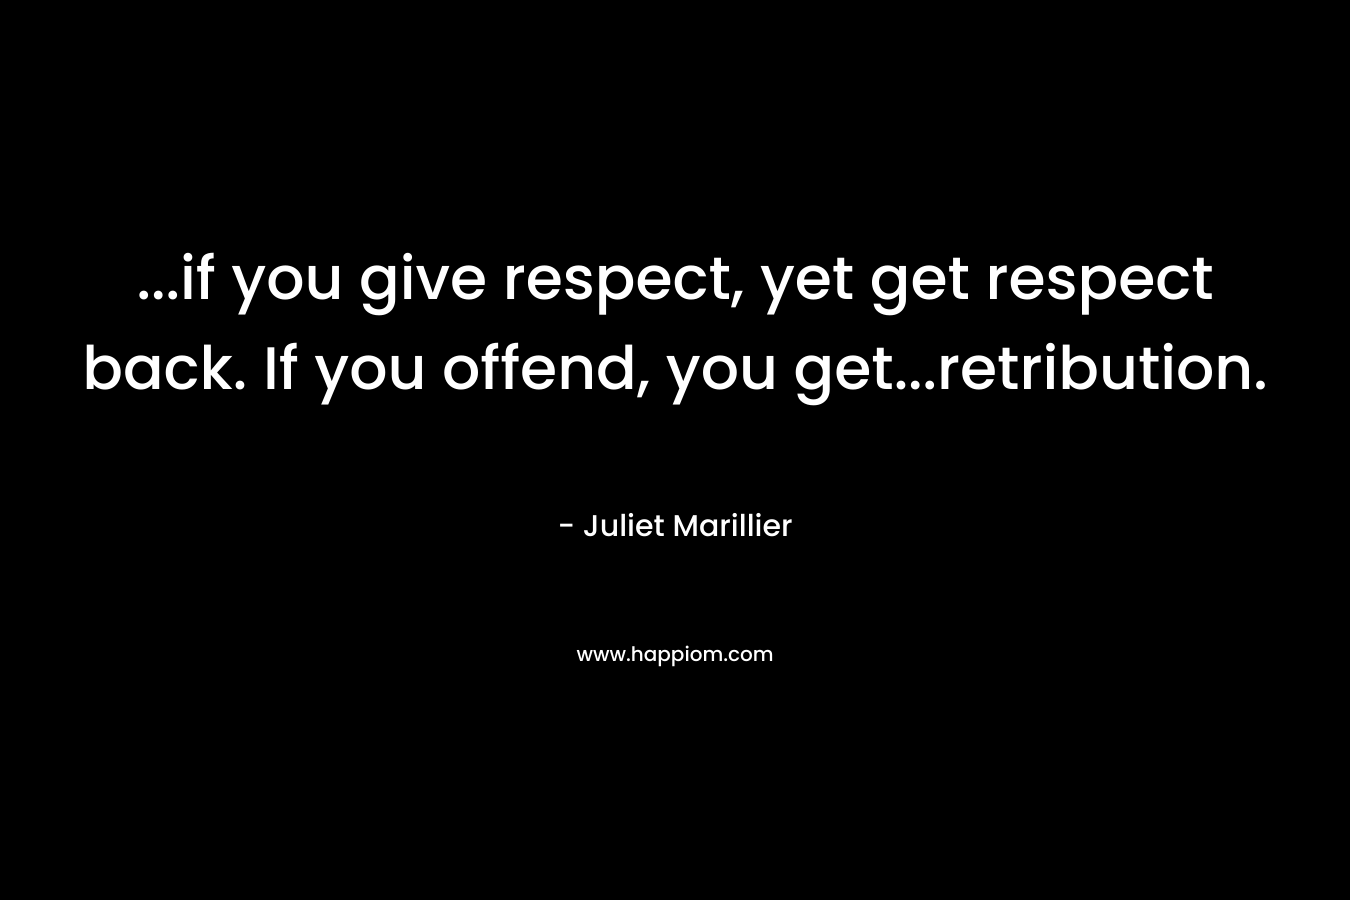 …if you give respect, yet get respect back. If you offend, you get…retribution. – Juliet Marillier